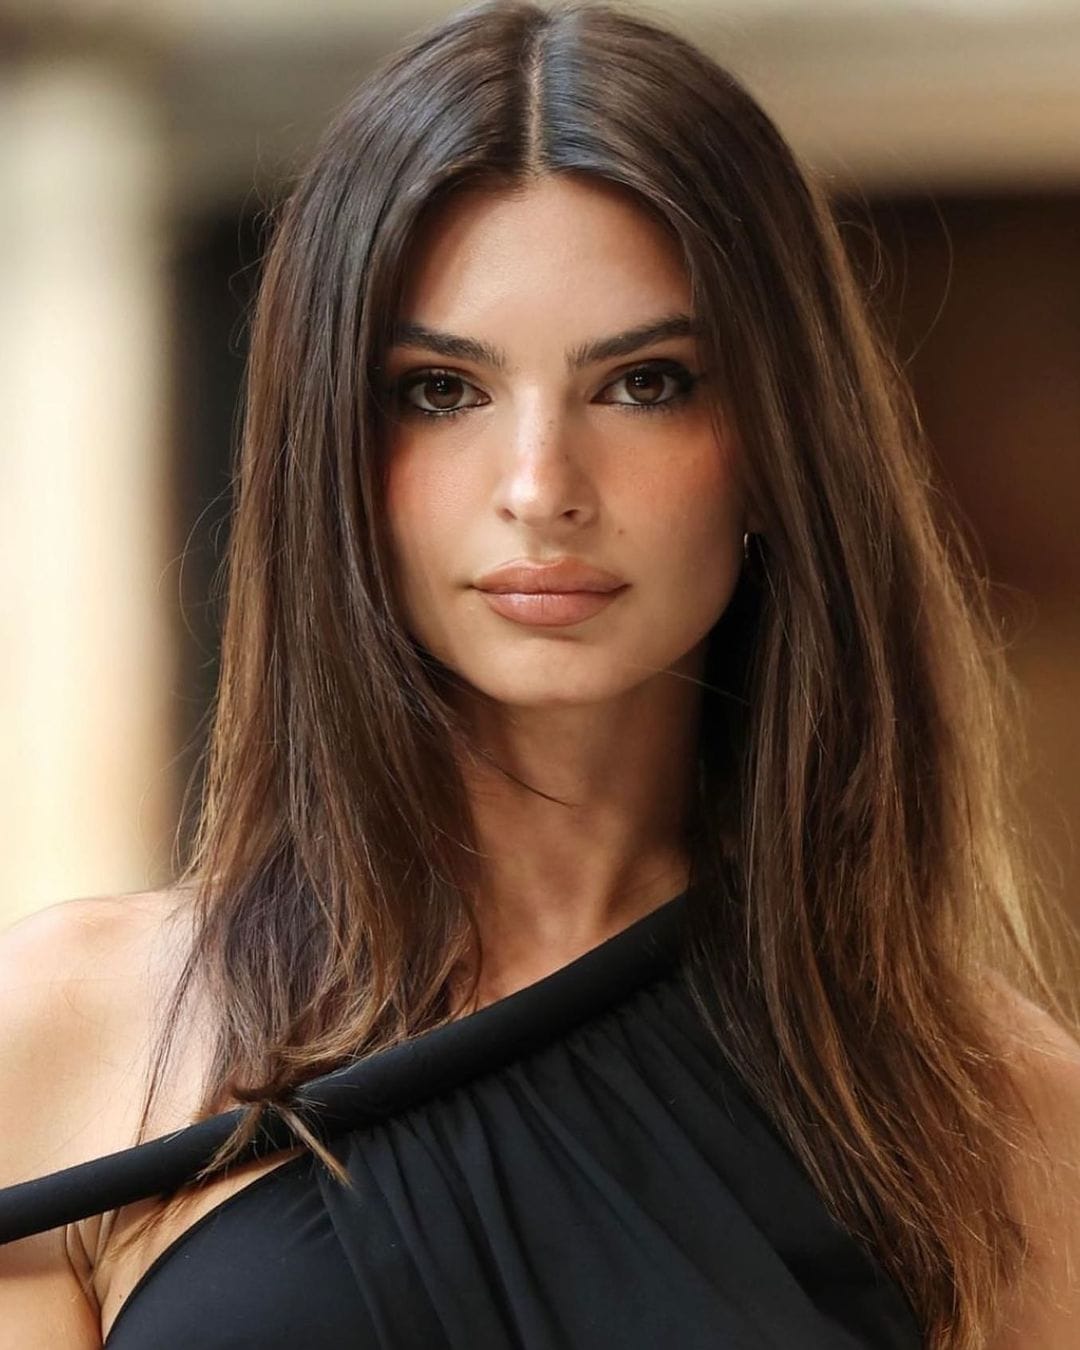 You are currently viewing Who is Emily Ratajkowski? Biography, Age, Height, Parents, Husband & Net Worth